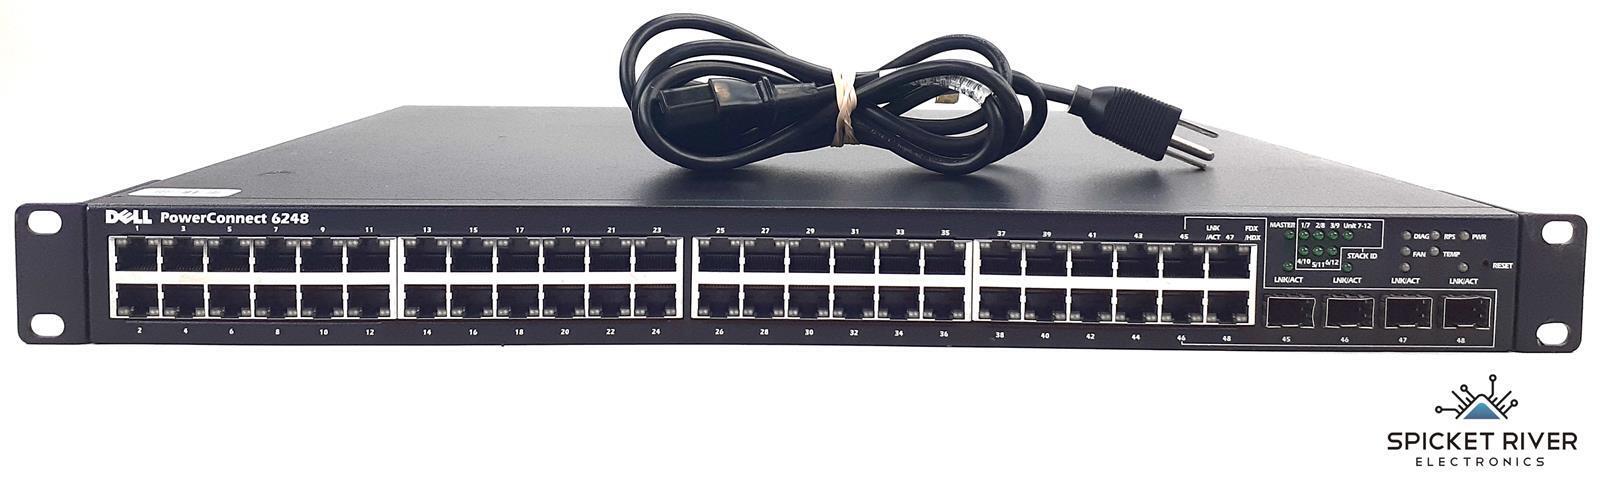 Dell PowerConnect 6248 48-Port Gigabit Ethernet Network Switch 0GP931